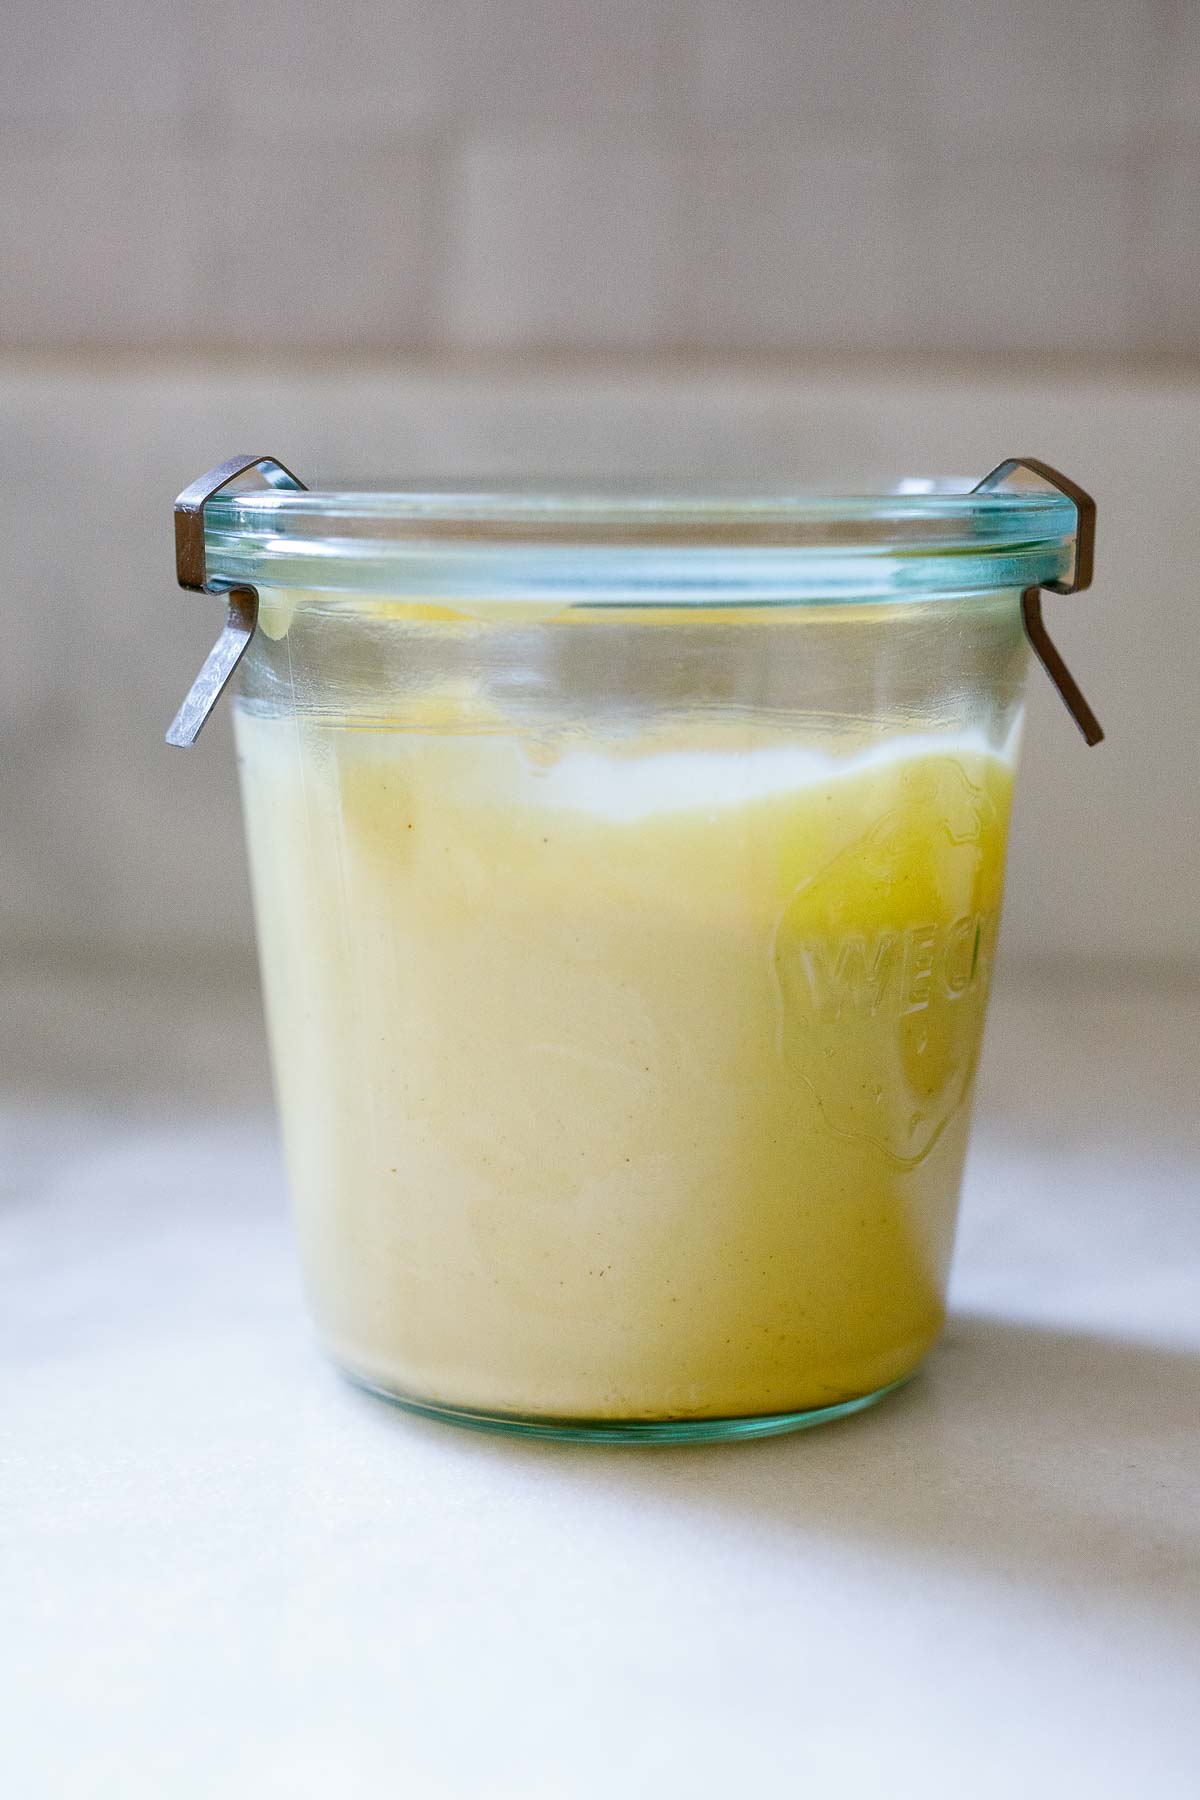 This homemade mayonnaise recipe is made with olive oil and can be made with an immersion blender, food processor, or whisk by hand.  Keep it in the fridge for up to 3 weeks! Vegan? Try our Vegan Mayo!